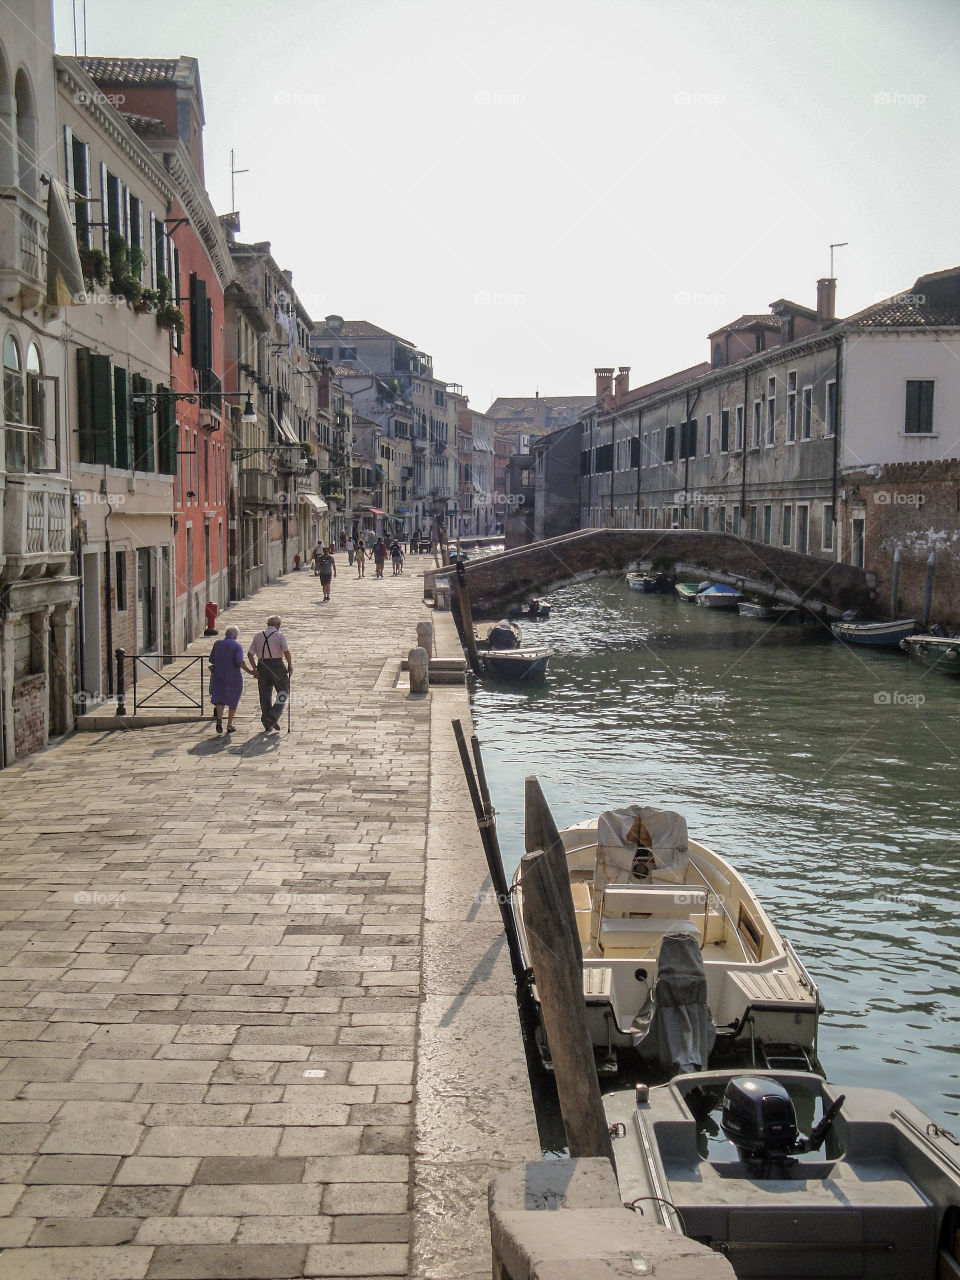 Strolling along the canals in Venice 